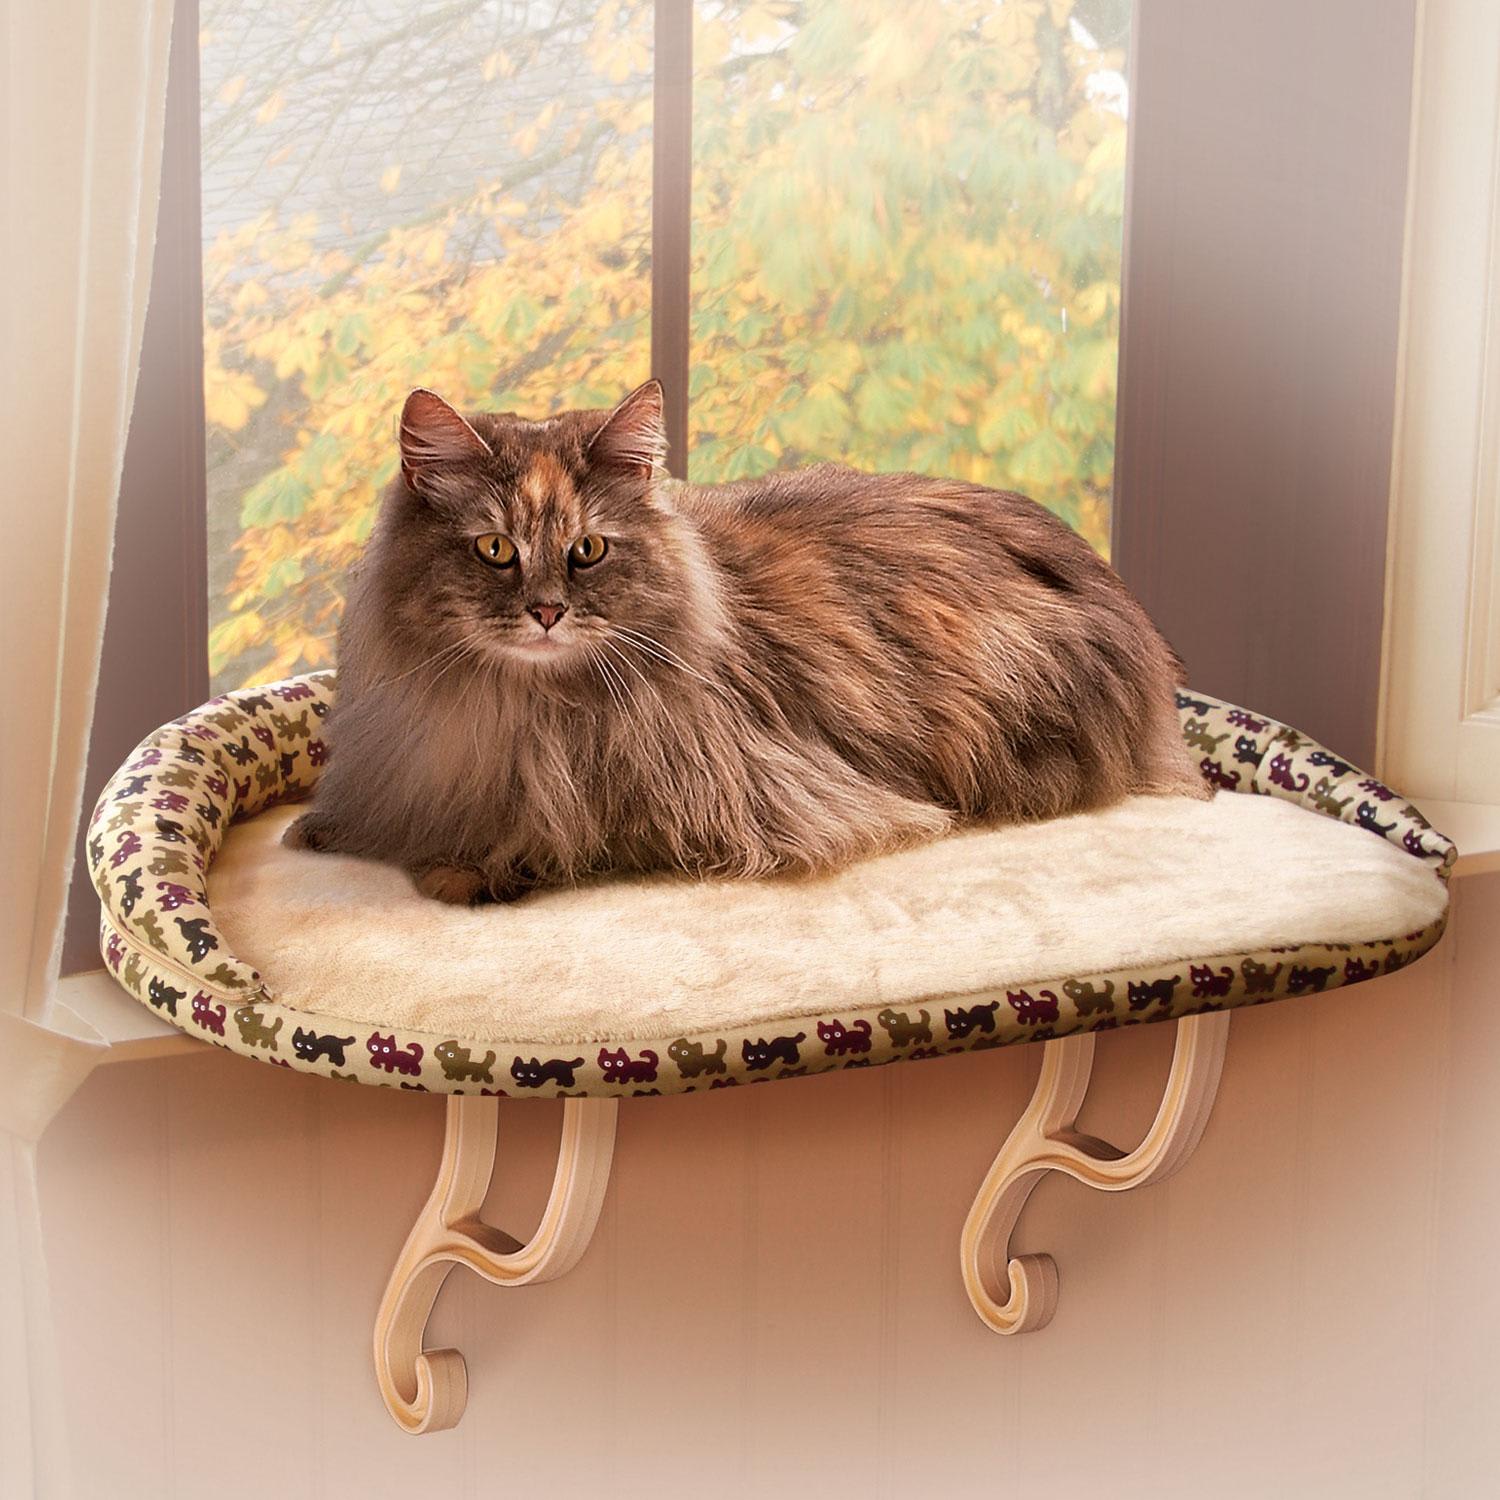 Photos - Bed & Furniture K&H Kitty Sill Bolster Deluxe Cat Window Perch, Small, Tan 100213044 